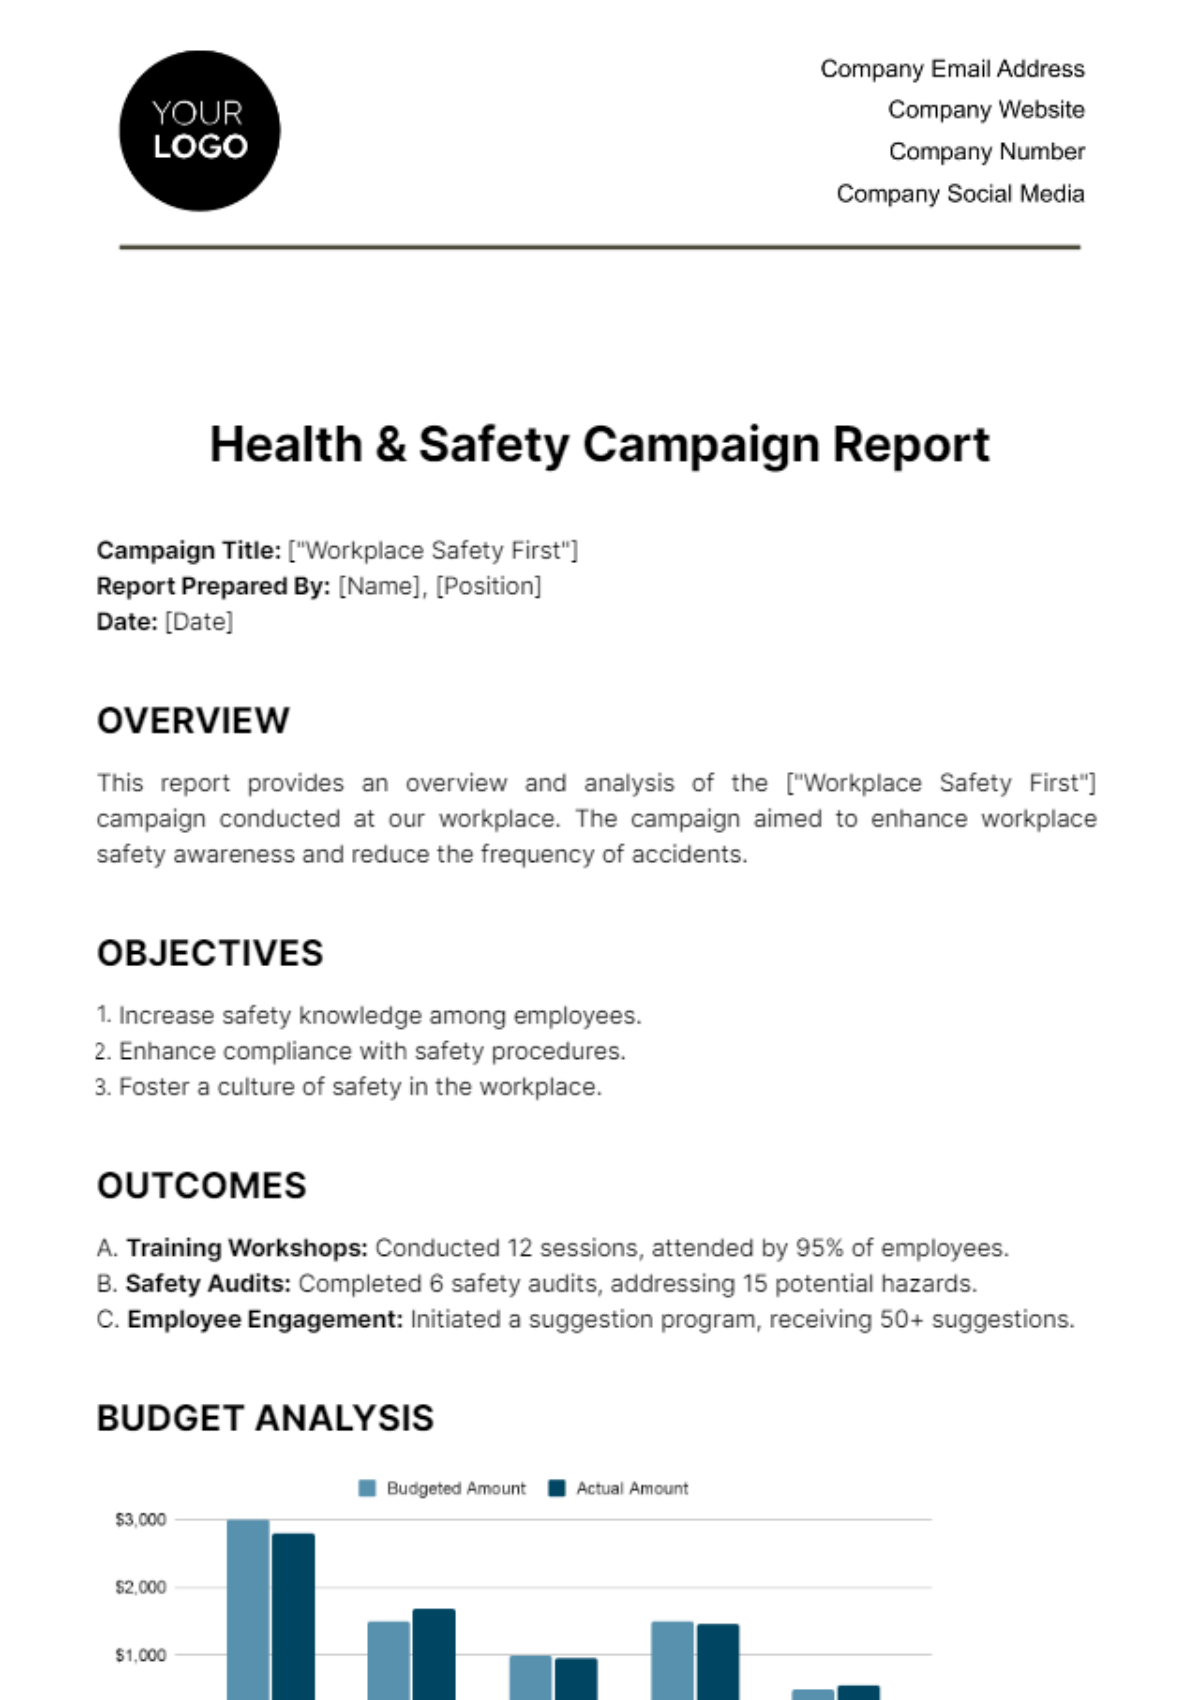 Free Health & Safety Campaign Report Template